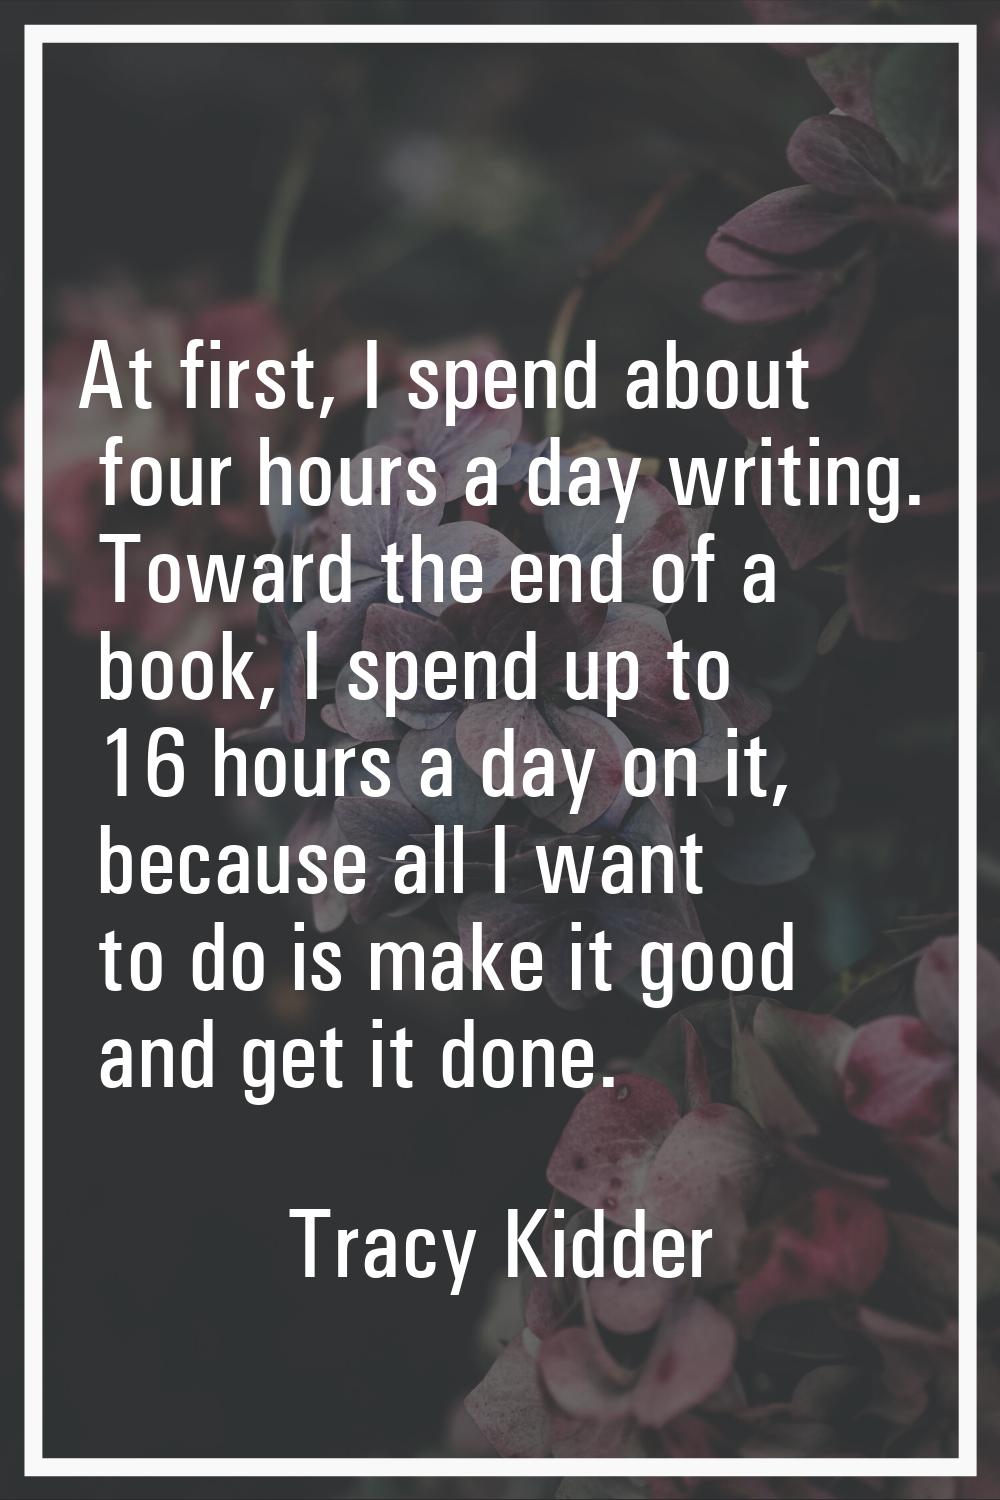 At first, I spend about four hours a day writing. Toward the end of a book, I spend up to 16 hours 